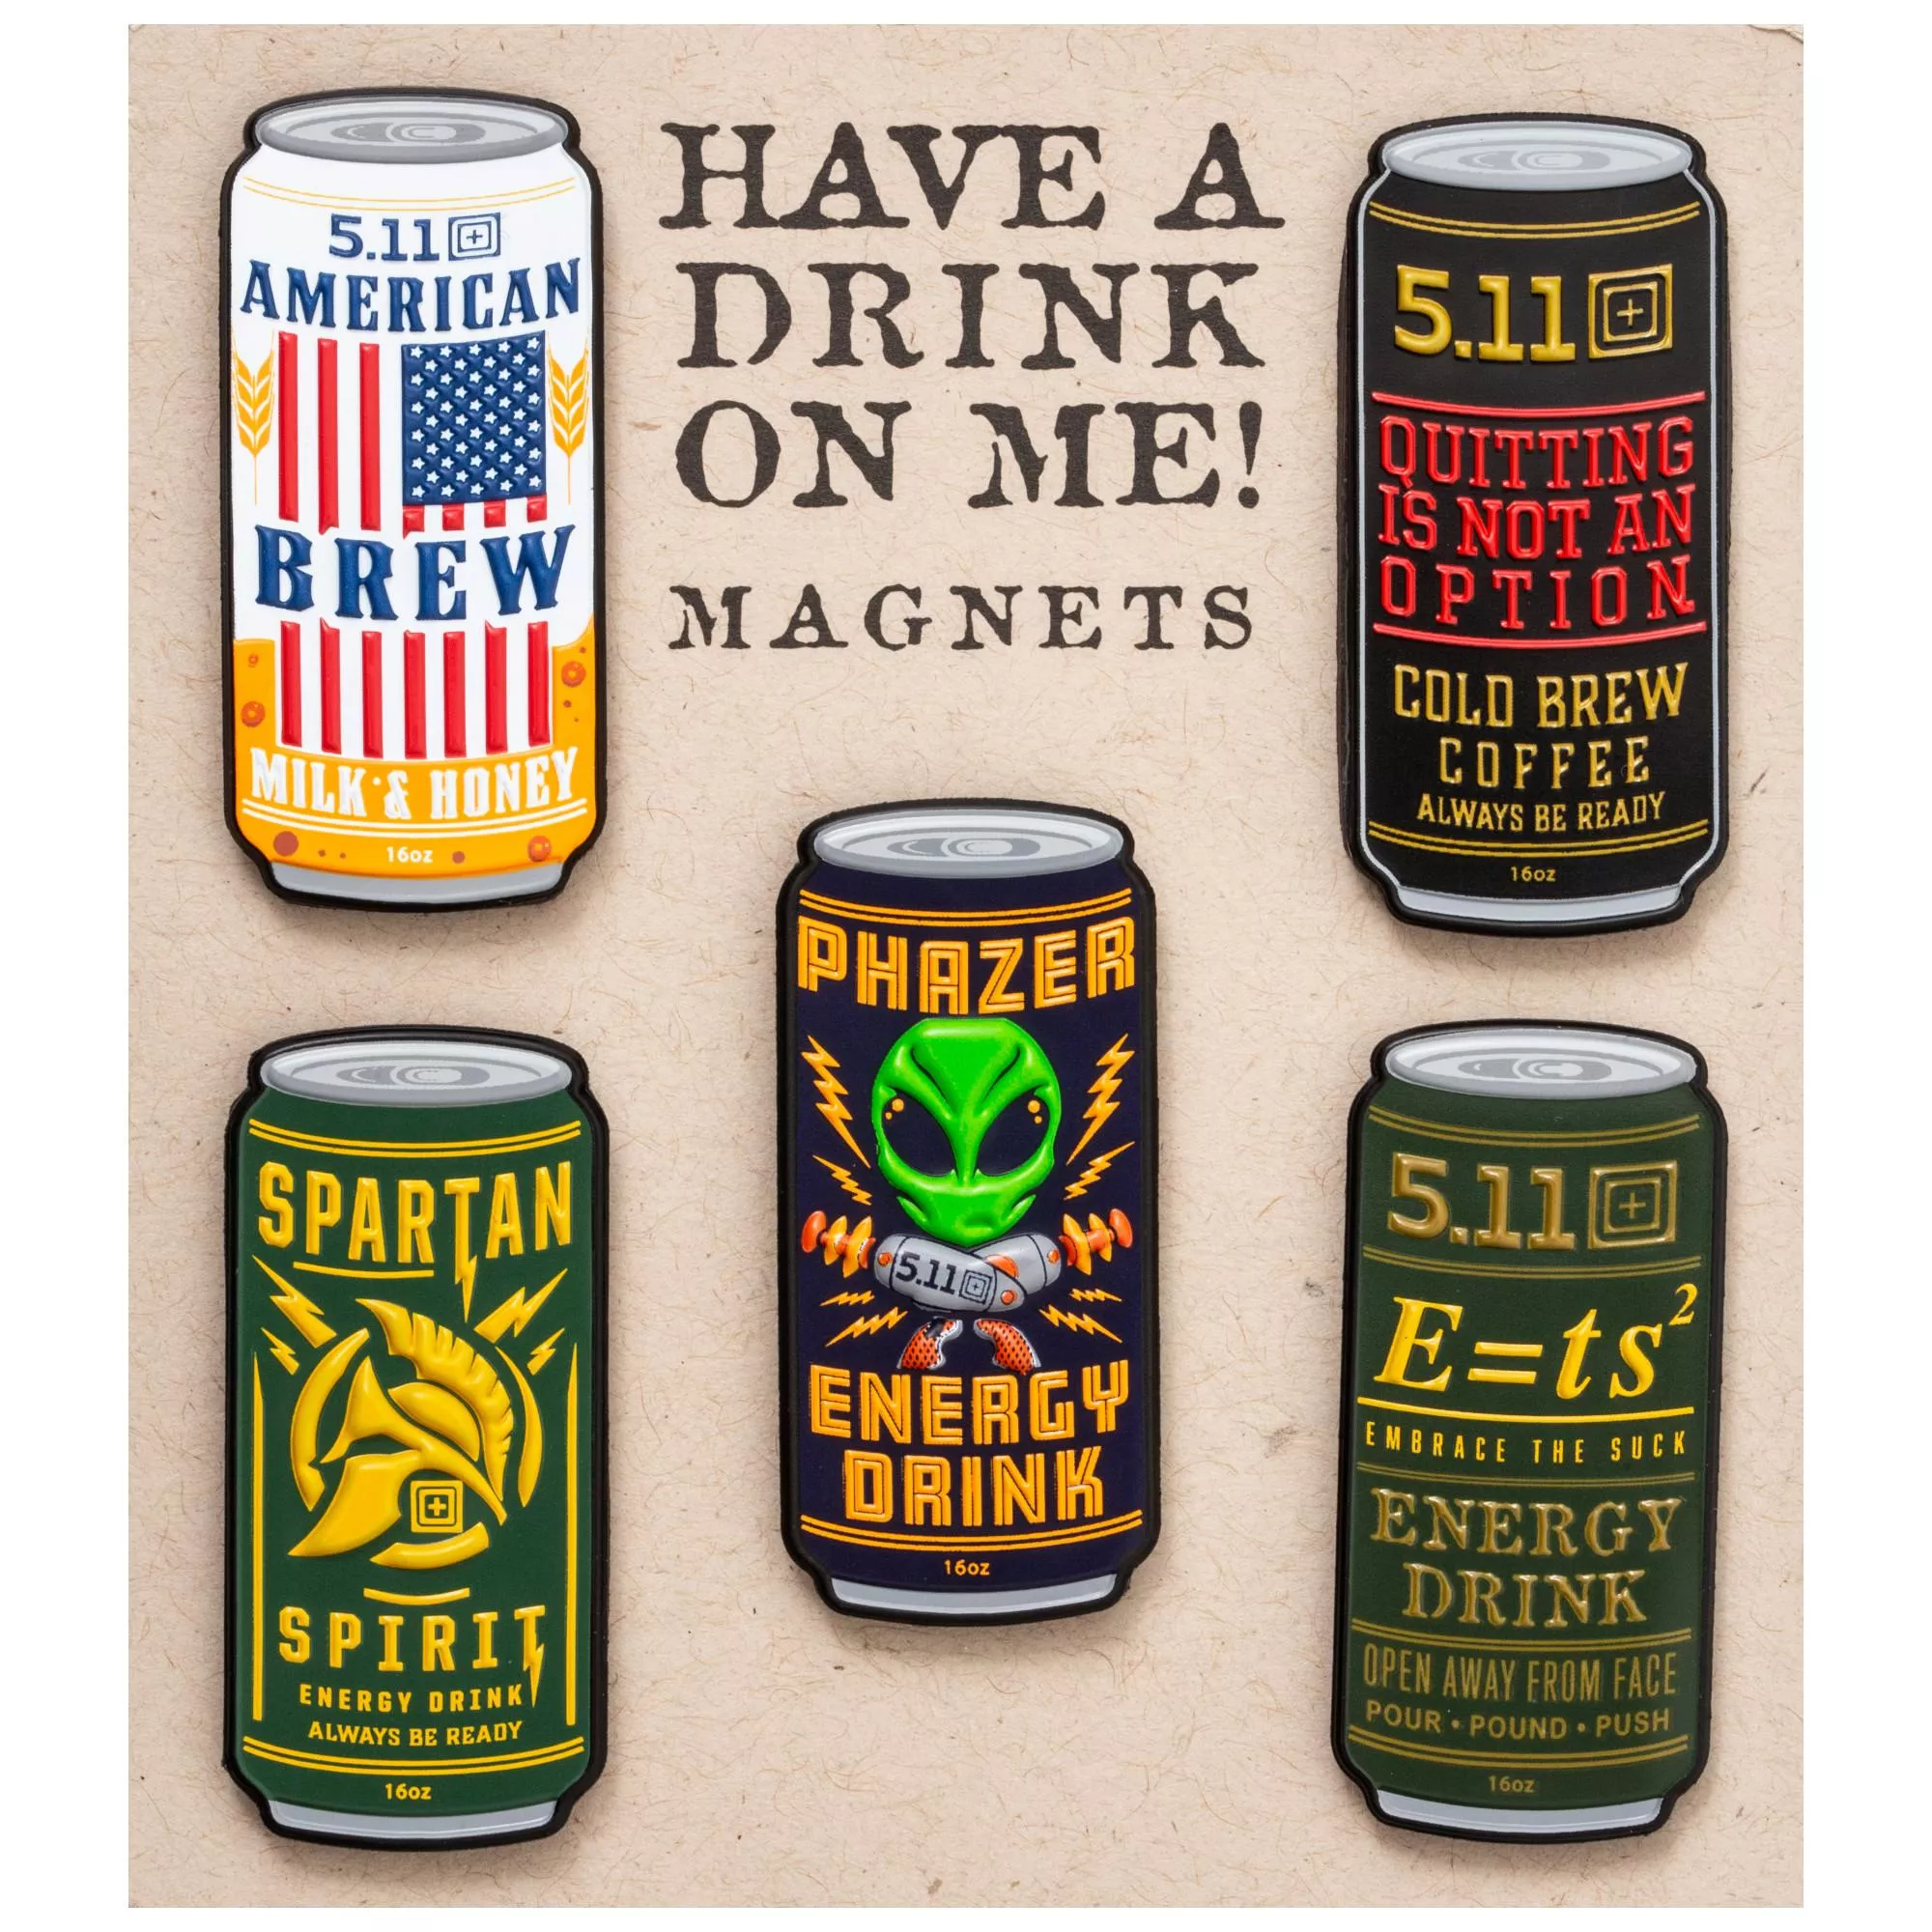 5.11-Canned Collection Magnets 飲料罐紀念款磁鐵組 #97173